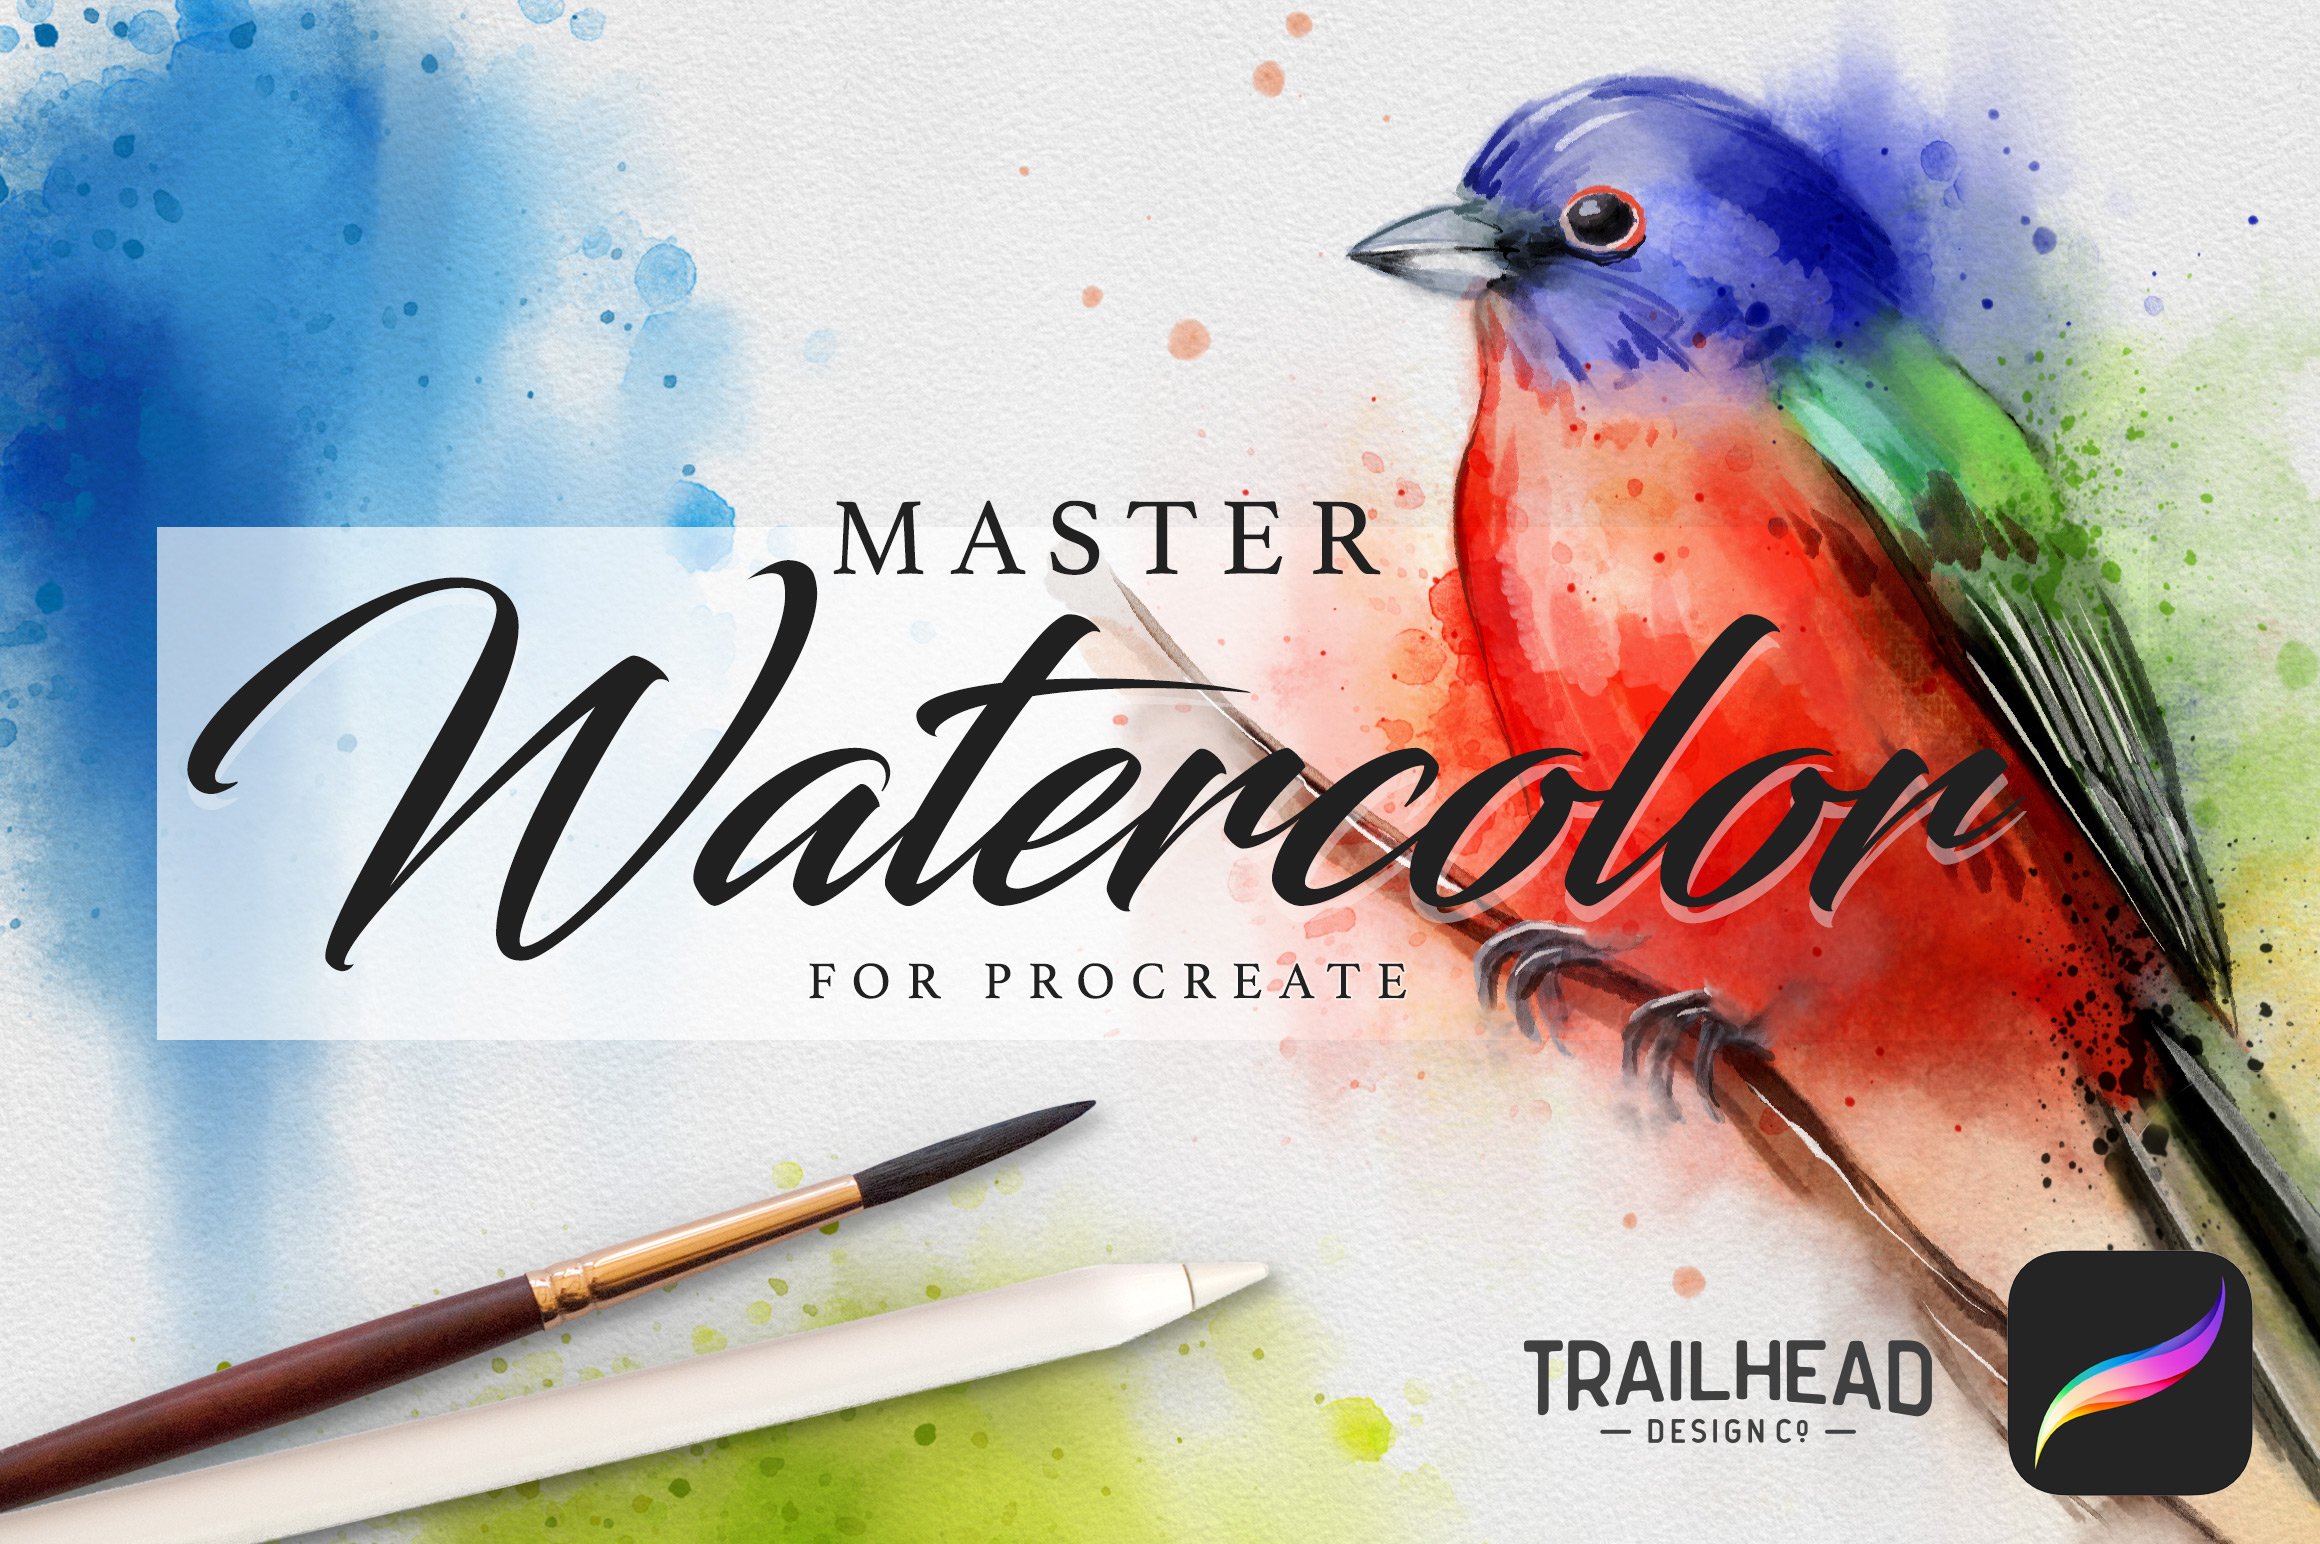 Master Watercolor Procreate Brushes